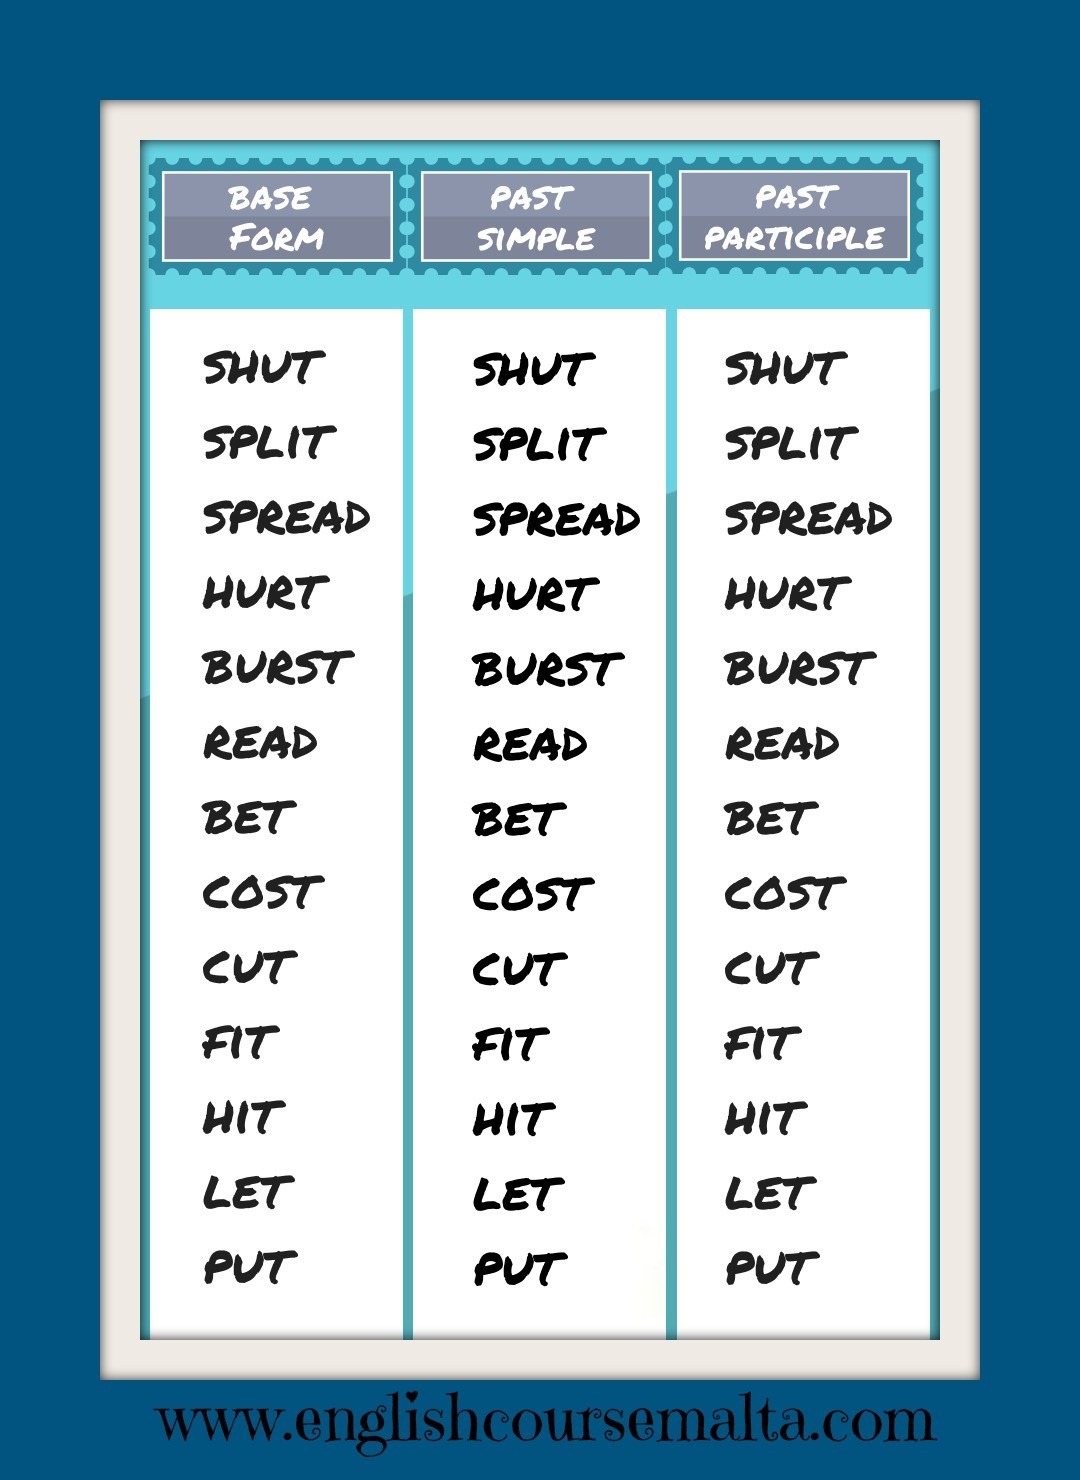 VERBS THAT STAY THE SAME IN THE PAST | English Course Malta